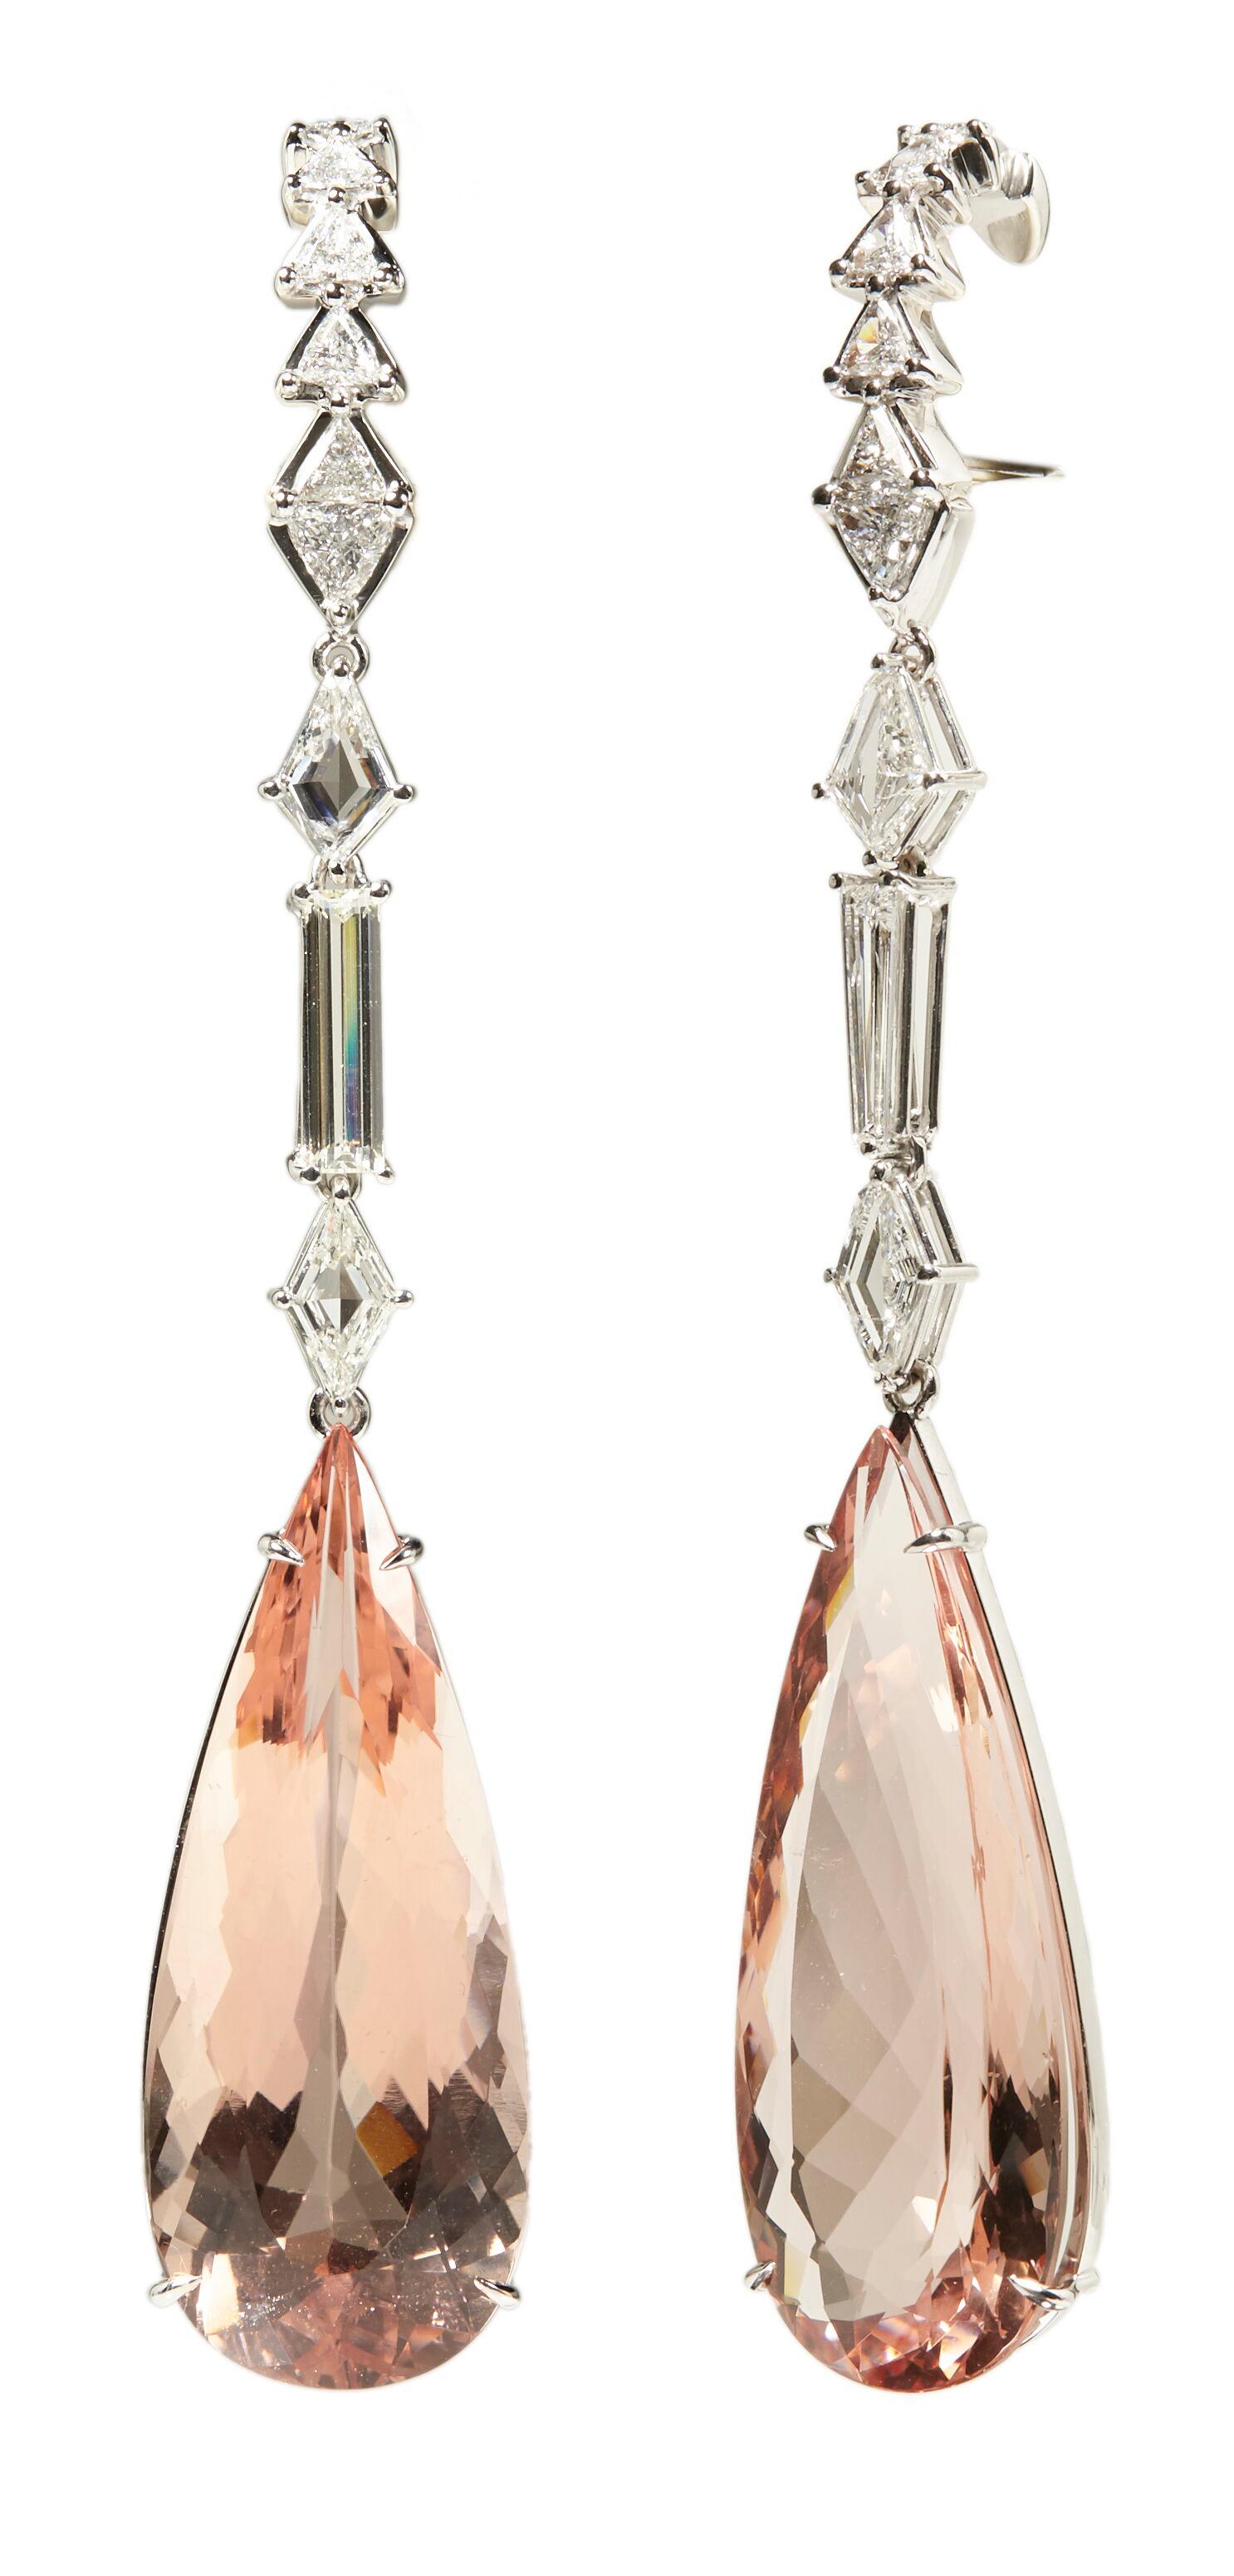 Designed exclusively by Ara Vartanian, these 18 Karat White Gold earrings feature pear-shaped faceted Morganites totalling 68.2 Carats, four trillion-shaped brilliant-cut White Diamonds totalling 1.147 Carats as well as a further 12 trillion-shaped